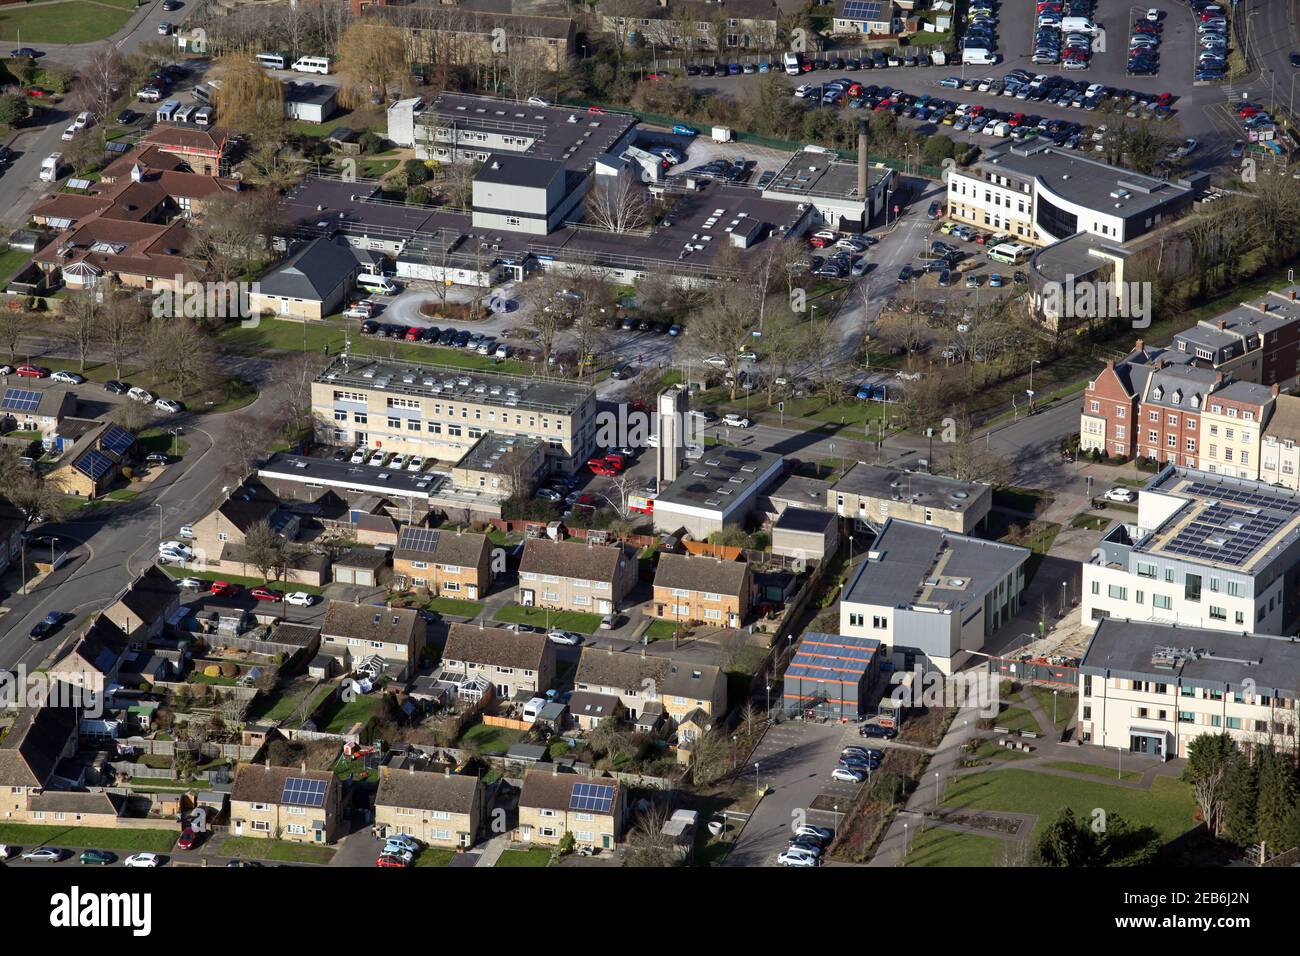 aerial view of Witney, showing the Community Hospital, police station & Abingdon & Witney College (just on right) Stock Photo